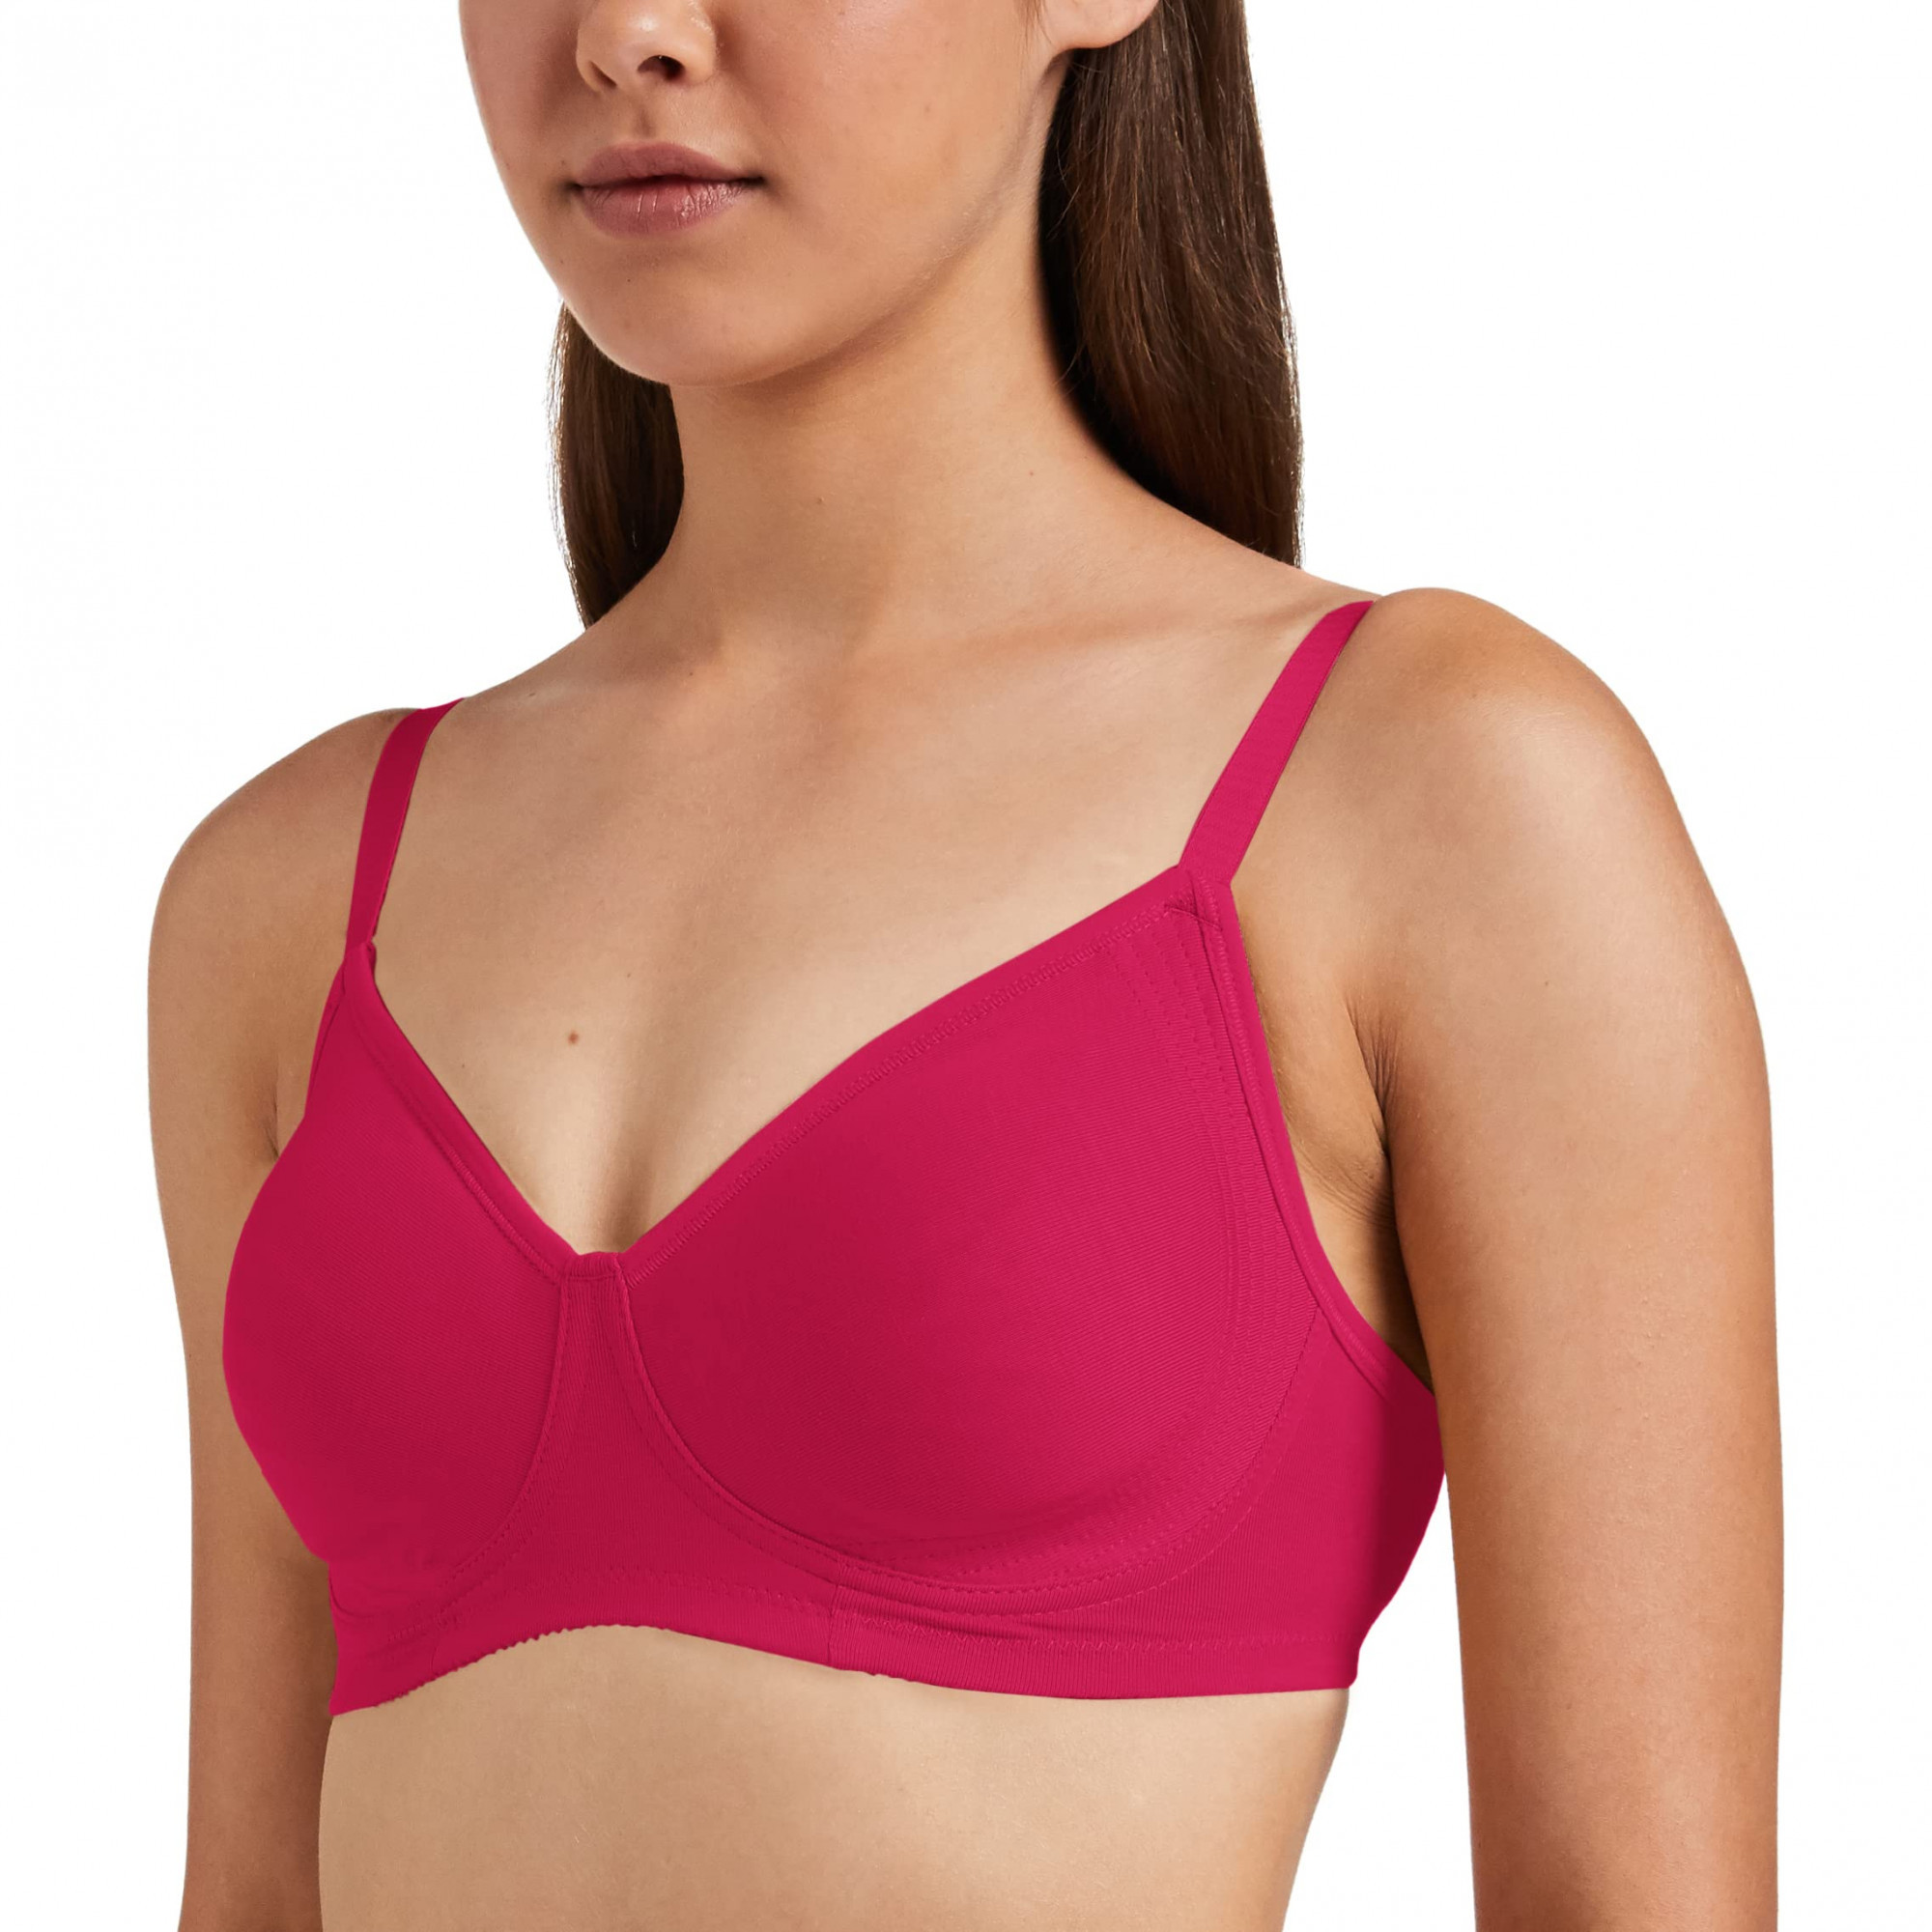 https://www.zebrs.com/uploads/zebrs/products/enamor-a042-side-support-shaper-supima-cotton-everyday-bra---non-padded-wirefree-amp-high-coveragesize-32b-71812110701498_l.jpg